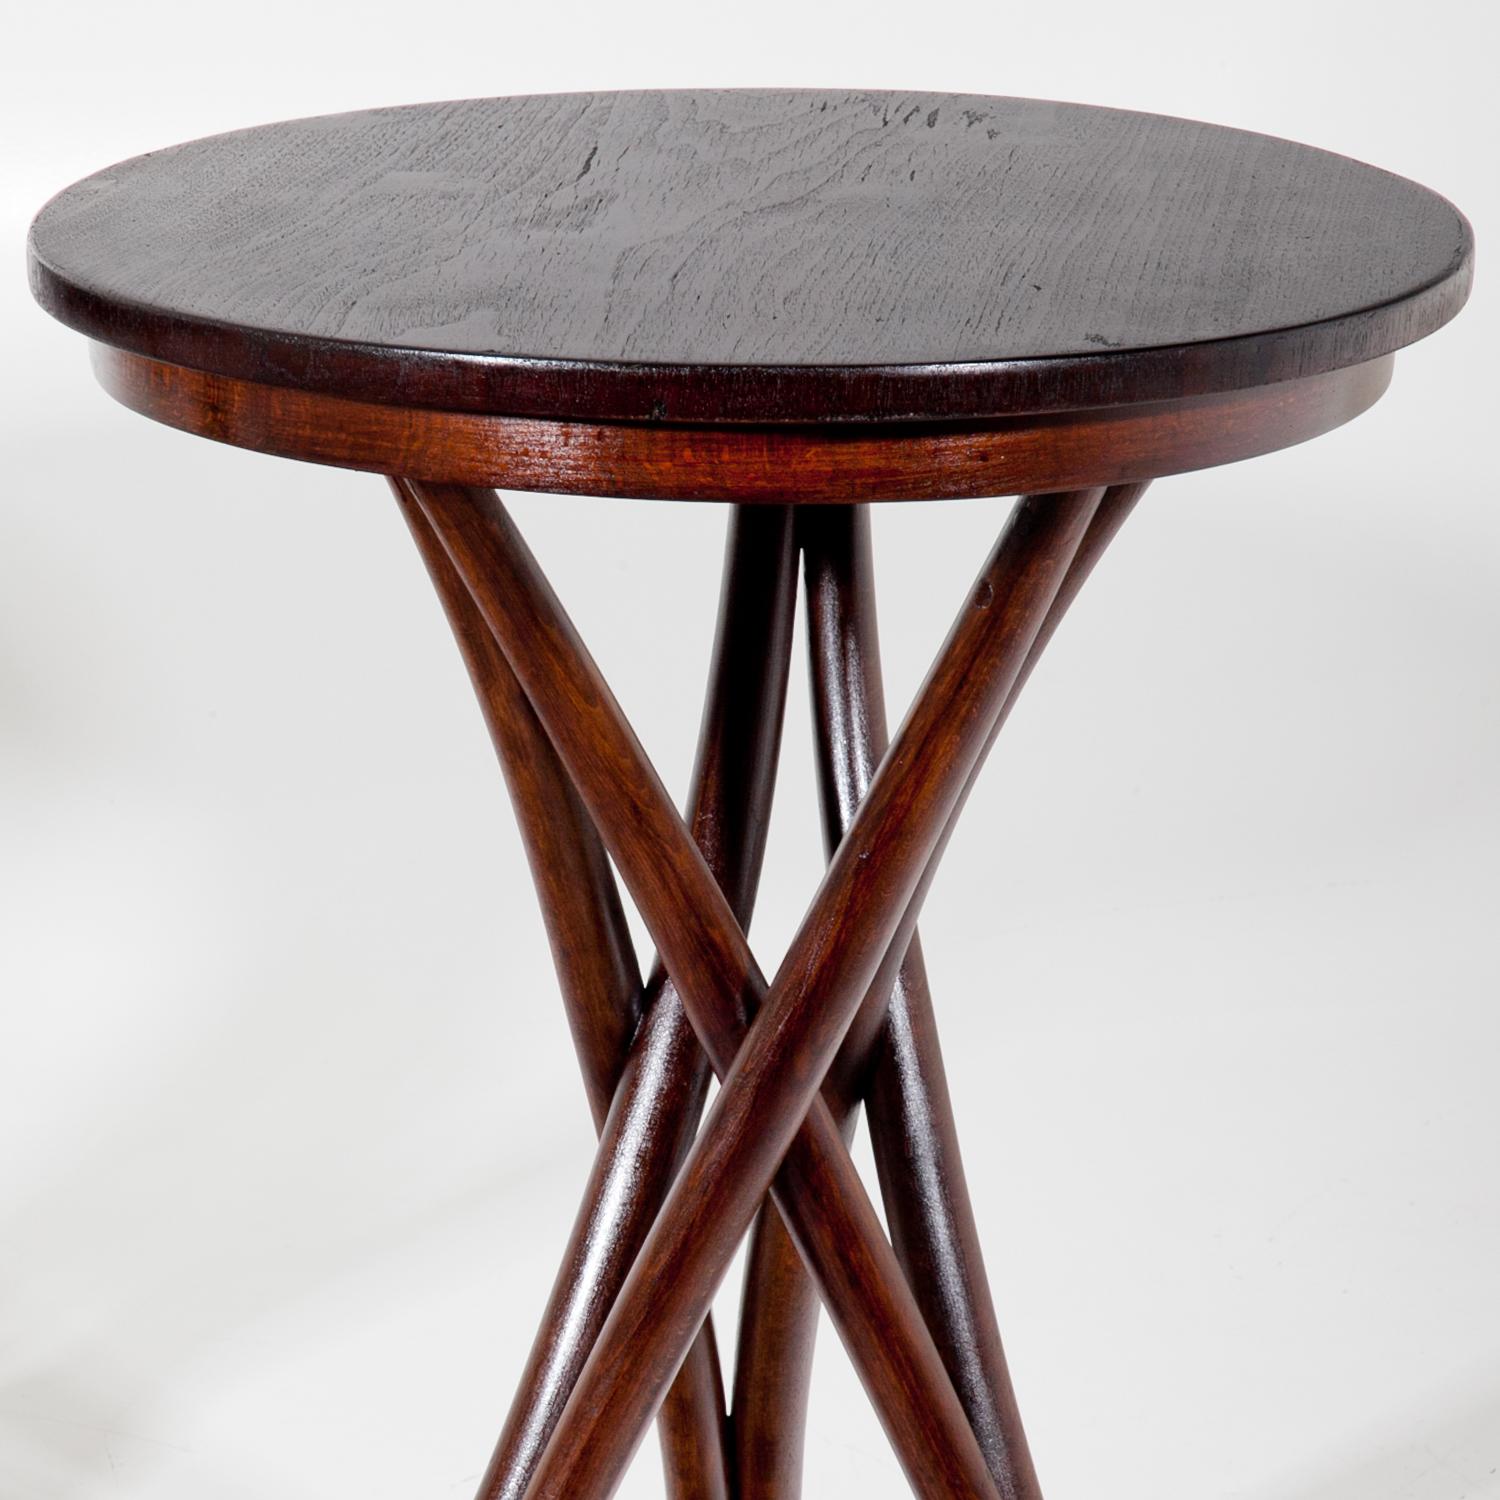 Thonet Brothers Side Tables No. 13, Early 20th Century (20. Jahrhundert)